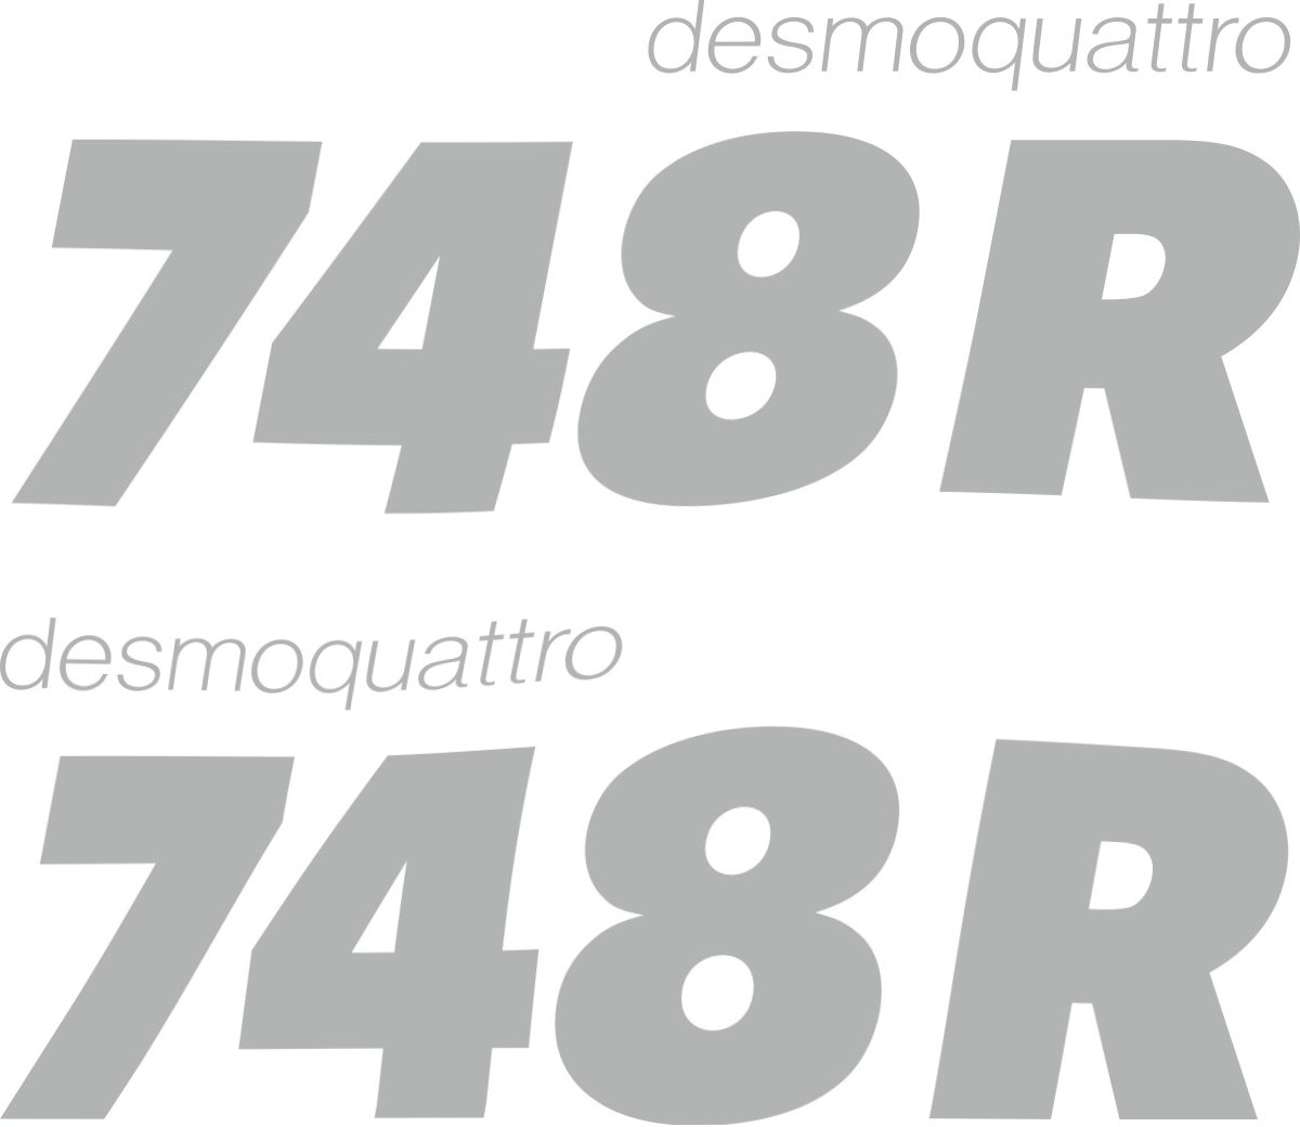 Series Adhesives Stickers Compatible DUCATI 748 R Superbike